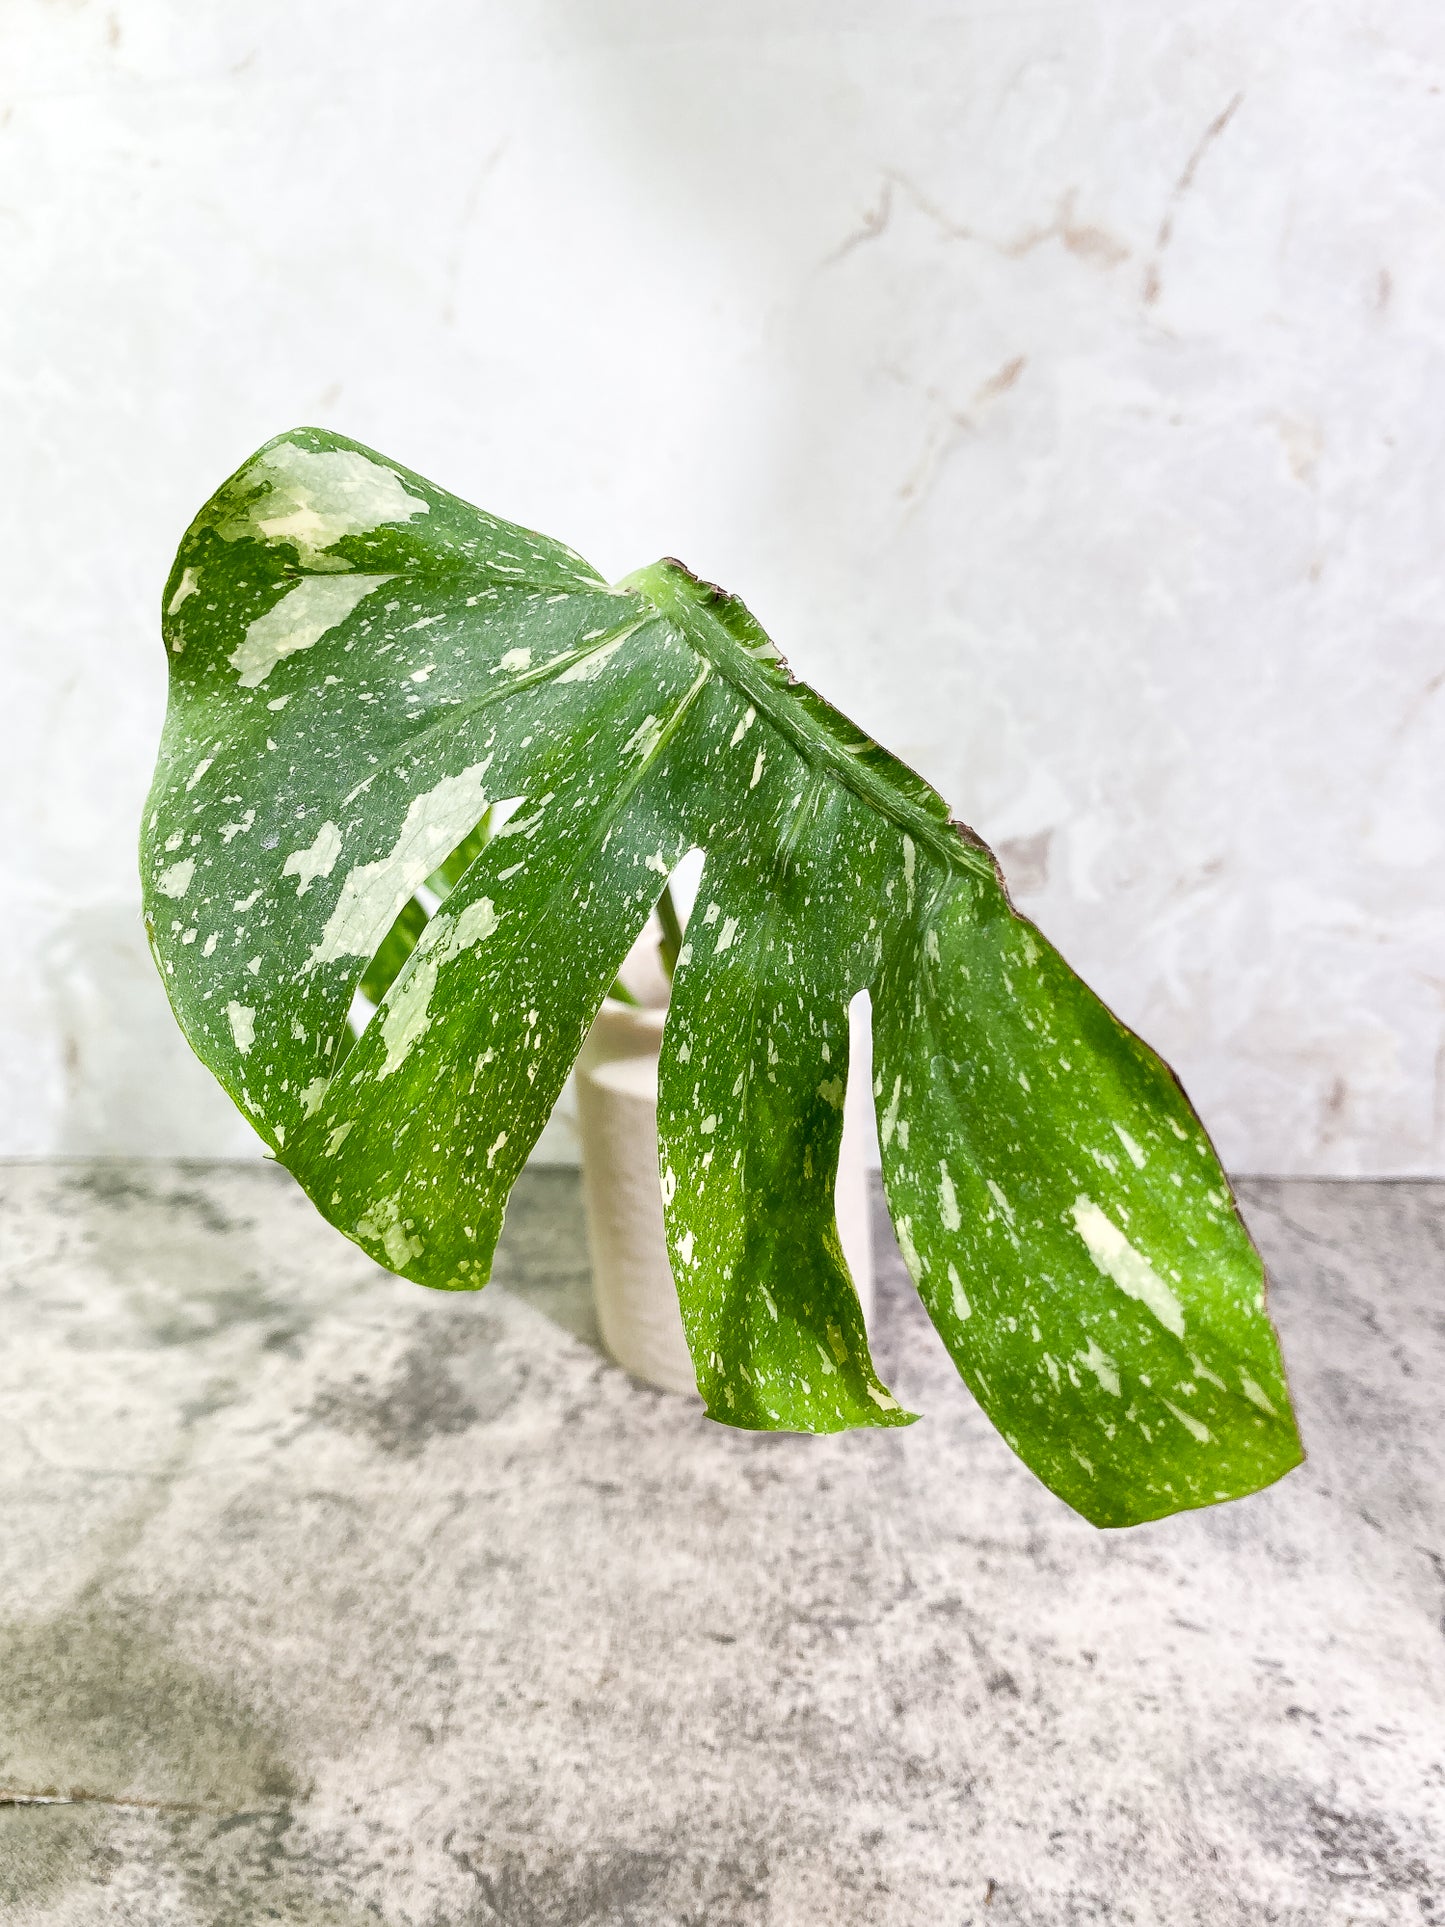 Monstera Thai Constellation 2 leaves Rooting Top Cutting